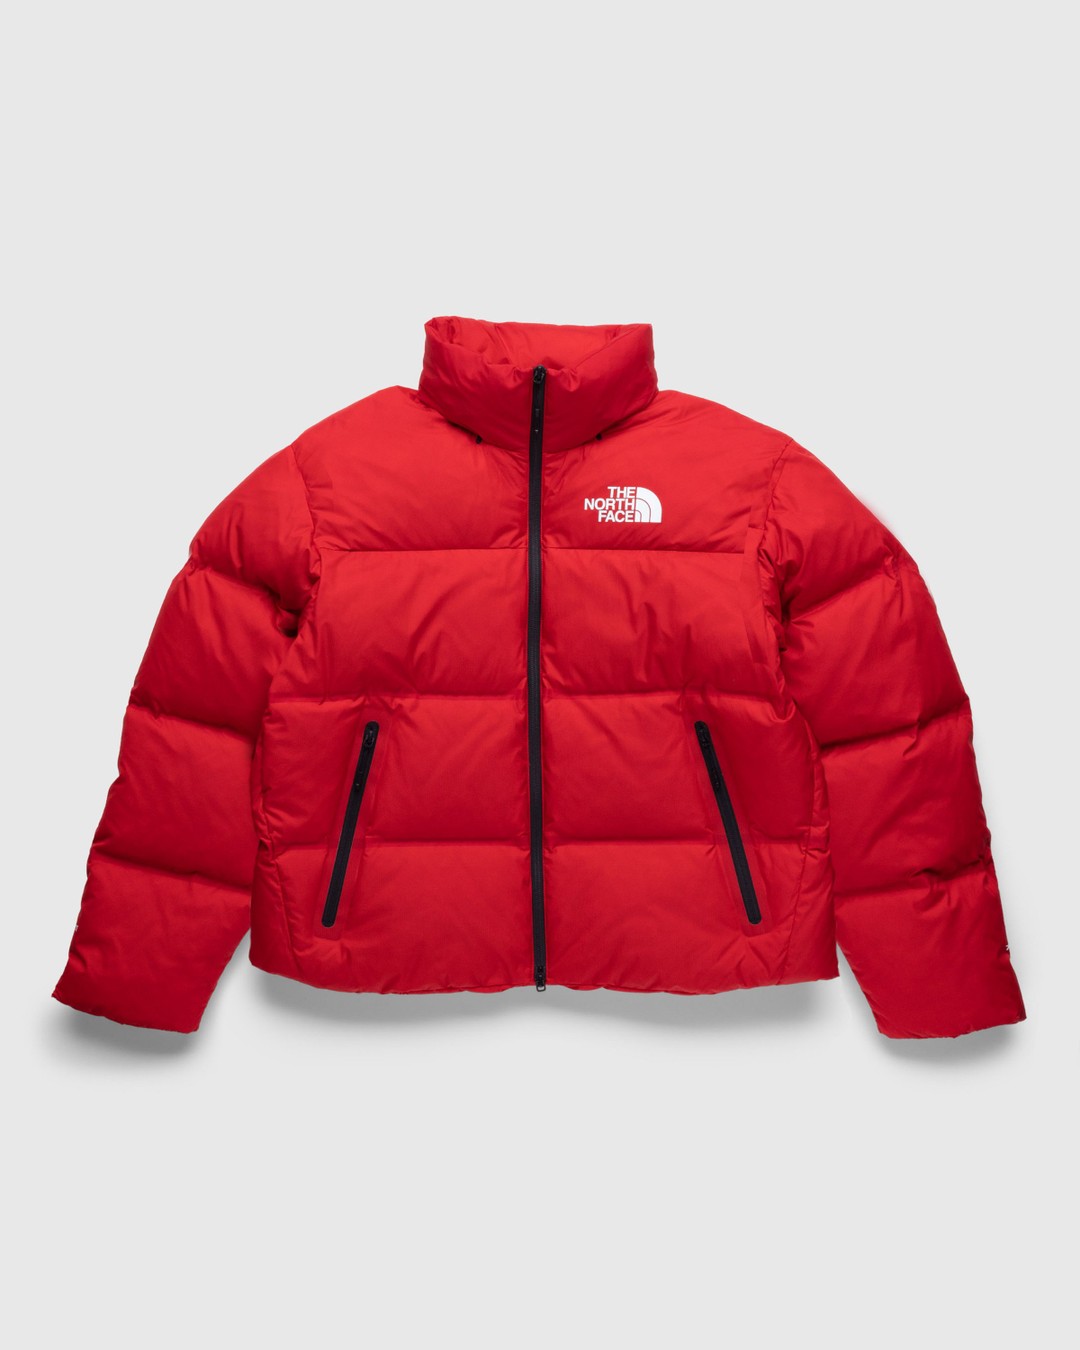 The North Face – Rmst Nuptse Jacket Red - Outerwear - Red - Image 1